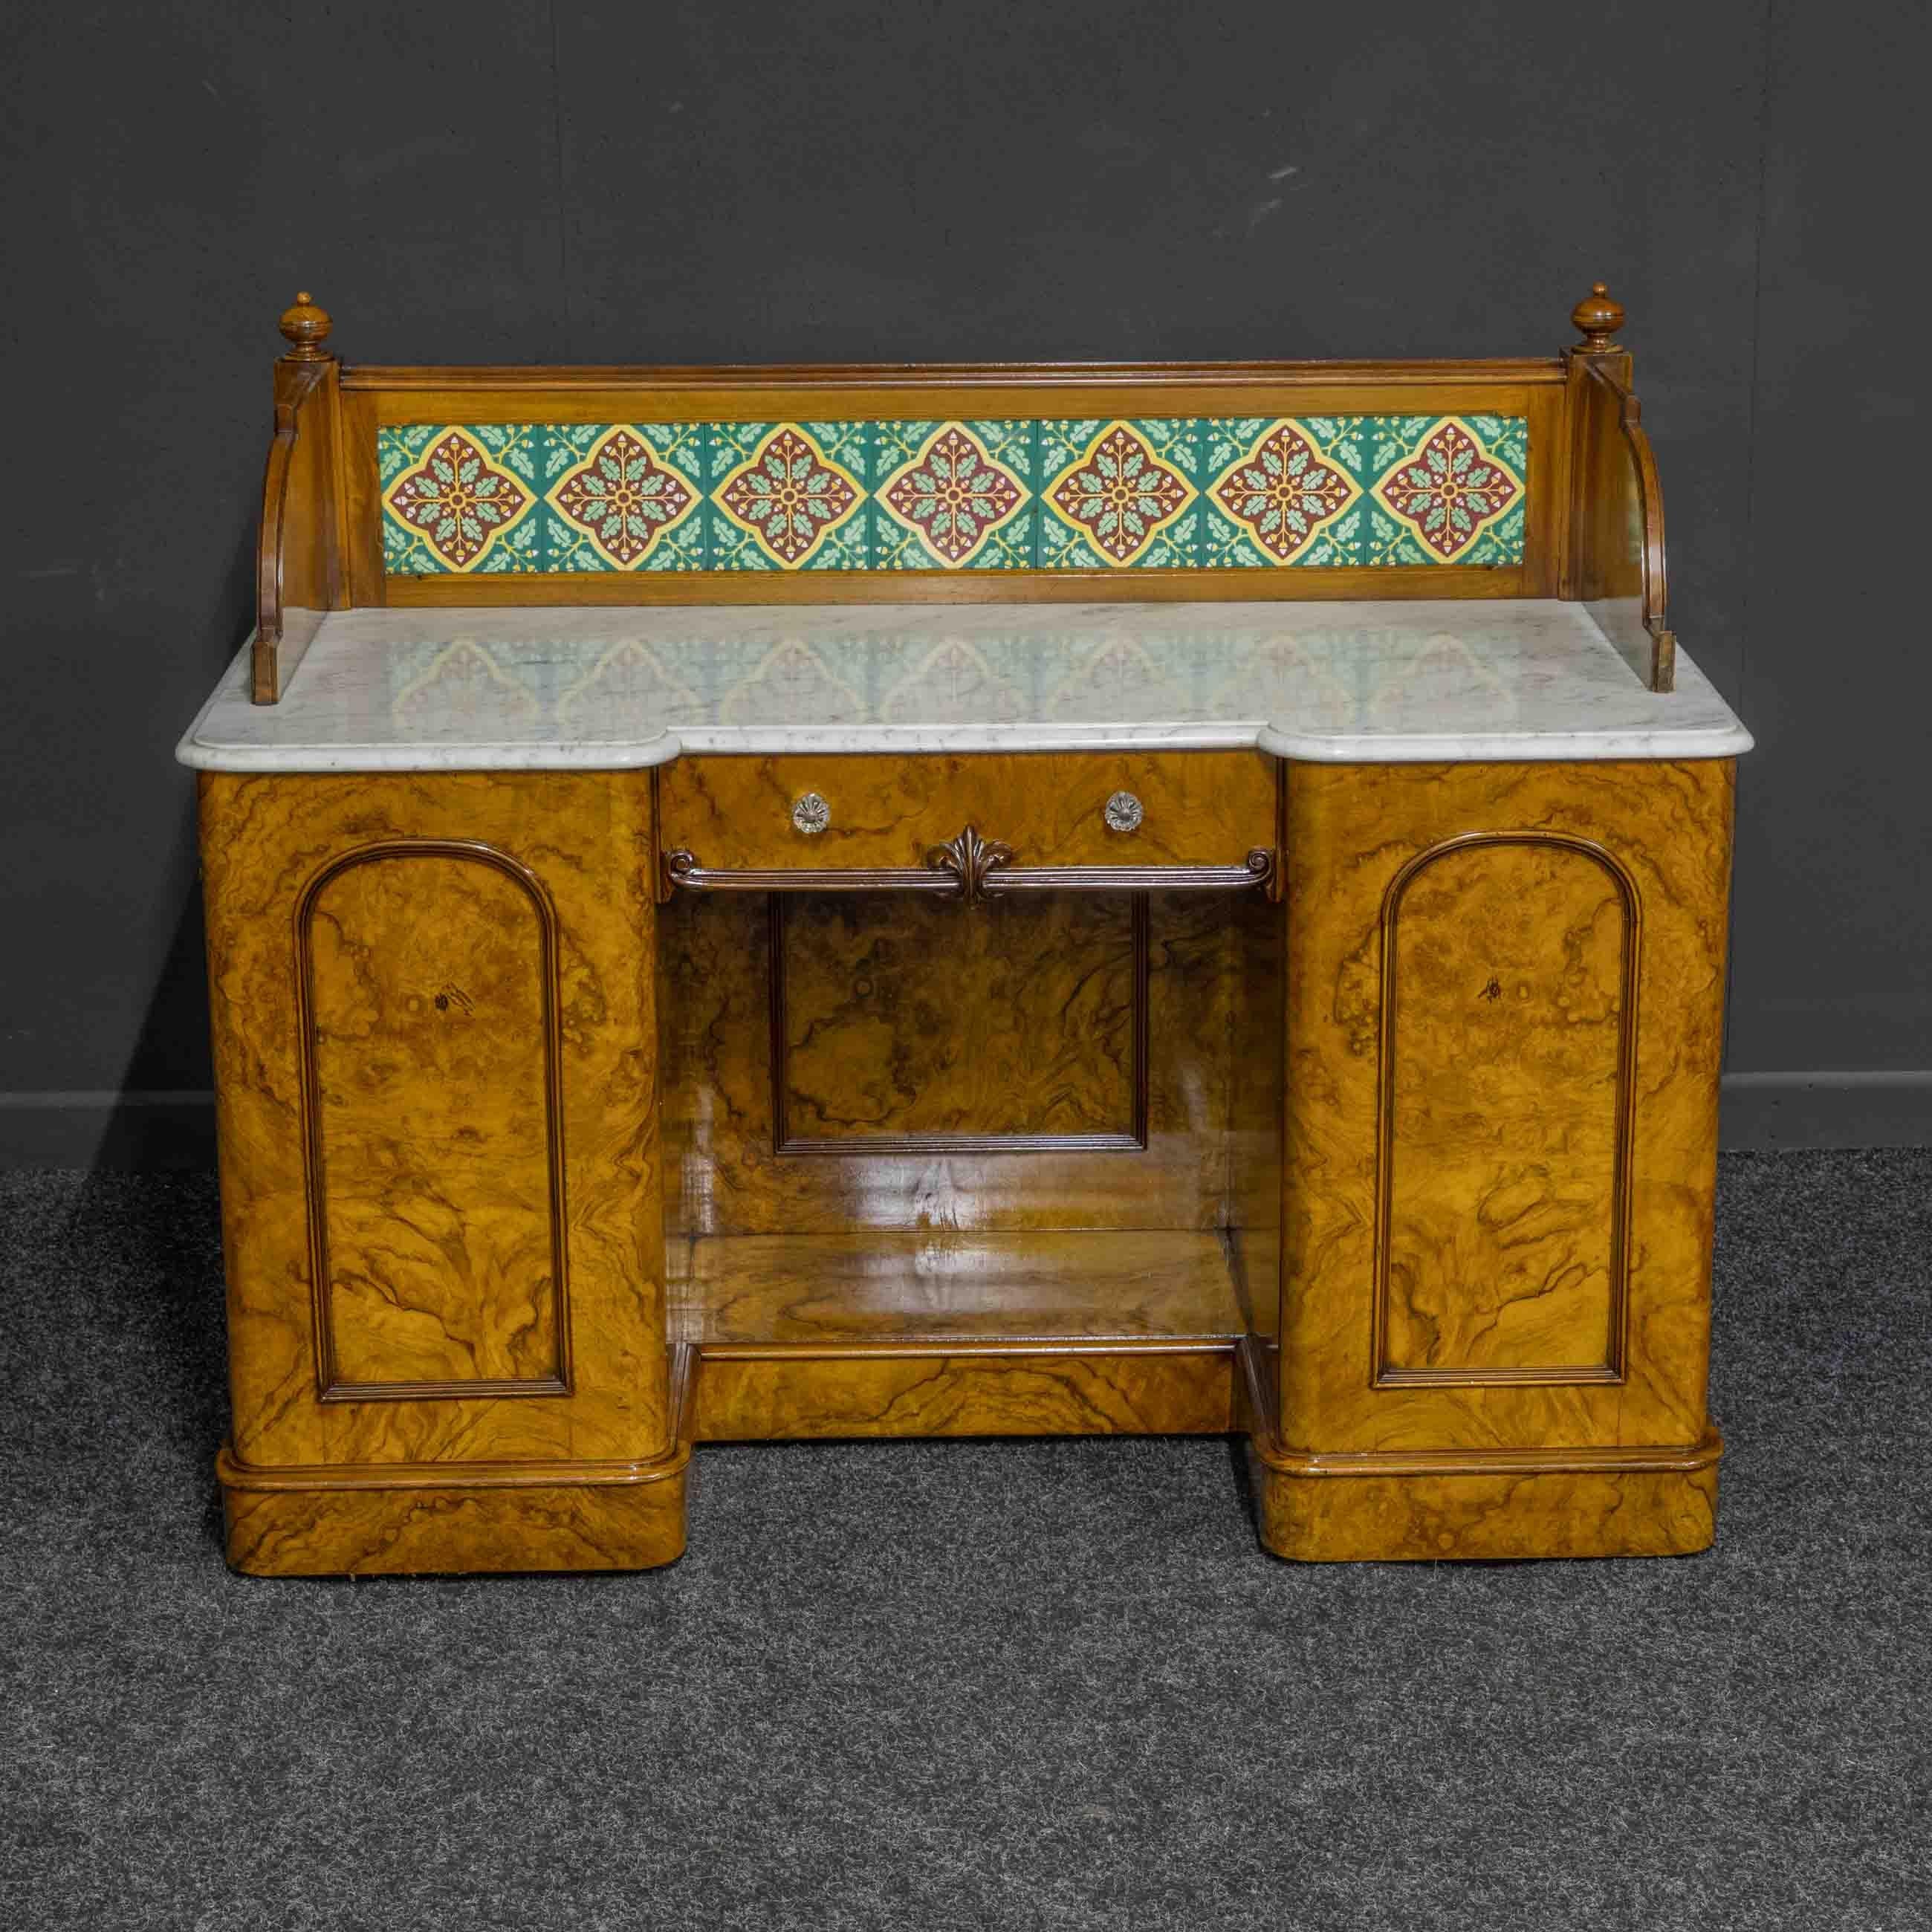 A stunning burr walnut veneered washstand from the Mid Victorian period. The tiles are most likely by Minton and have Aesthetic movement overtones within their design. Of exceptional quality as can be discovered when opening the cupboard doors,